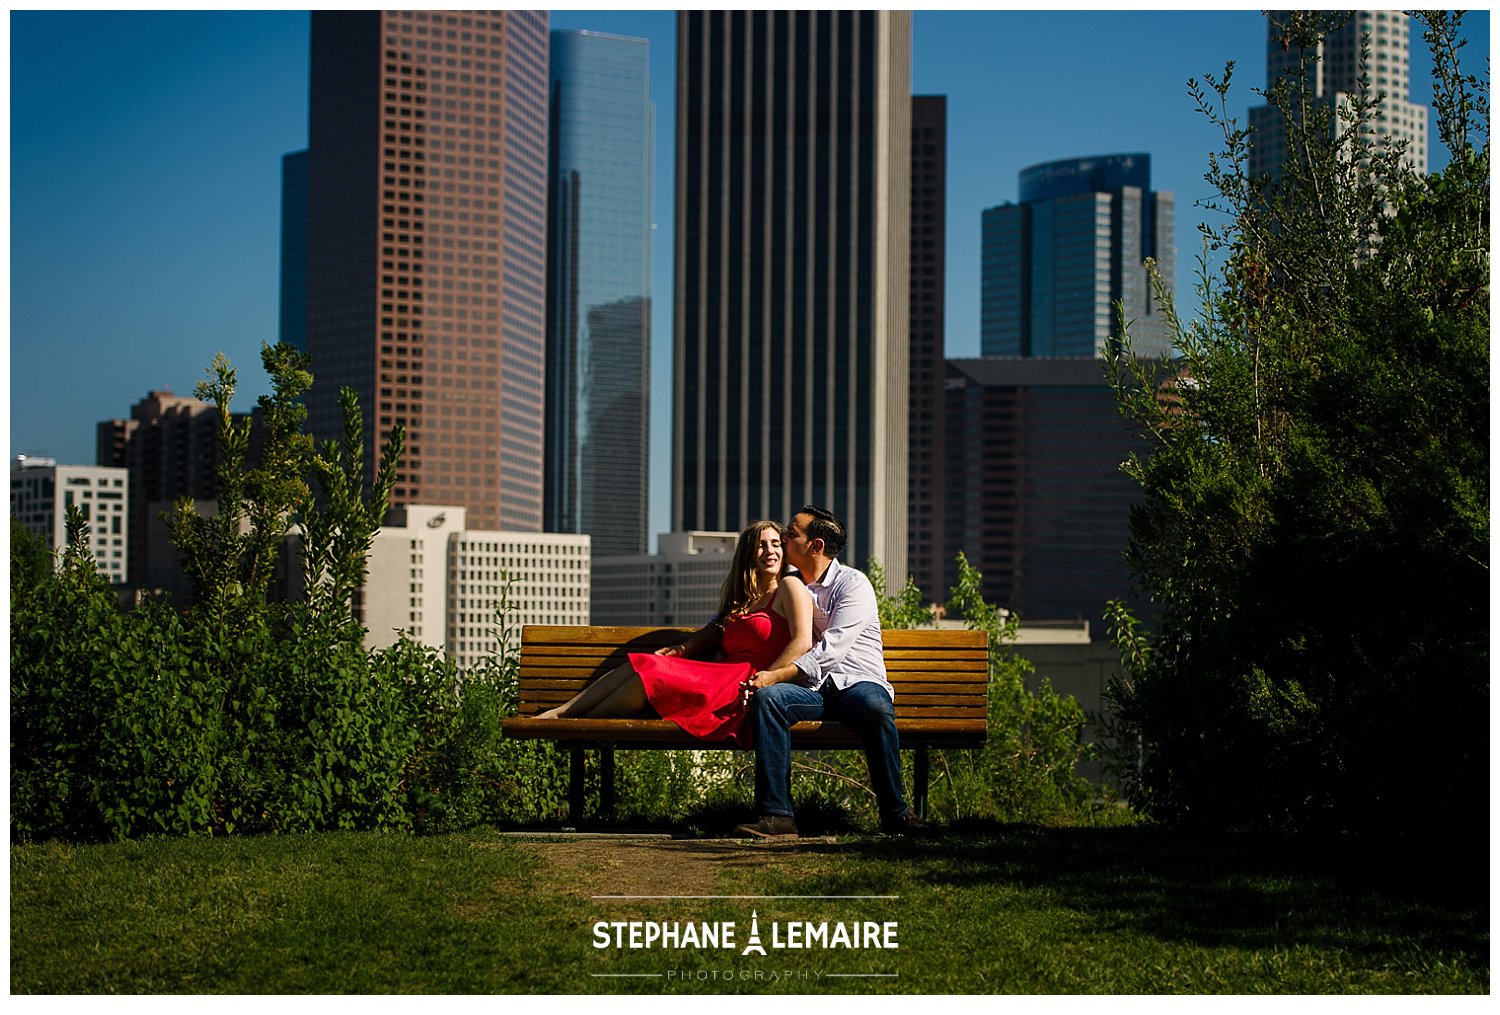 Couple sitting on bench in front of city